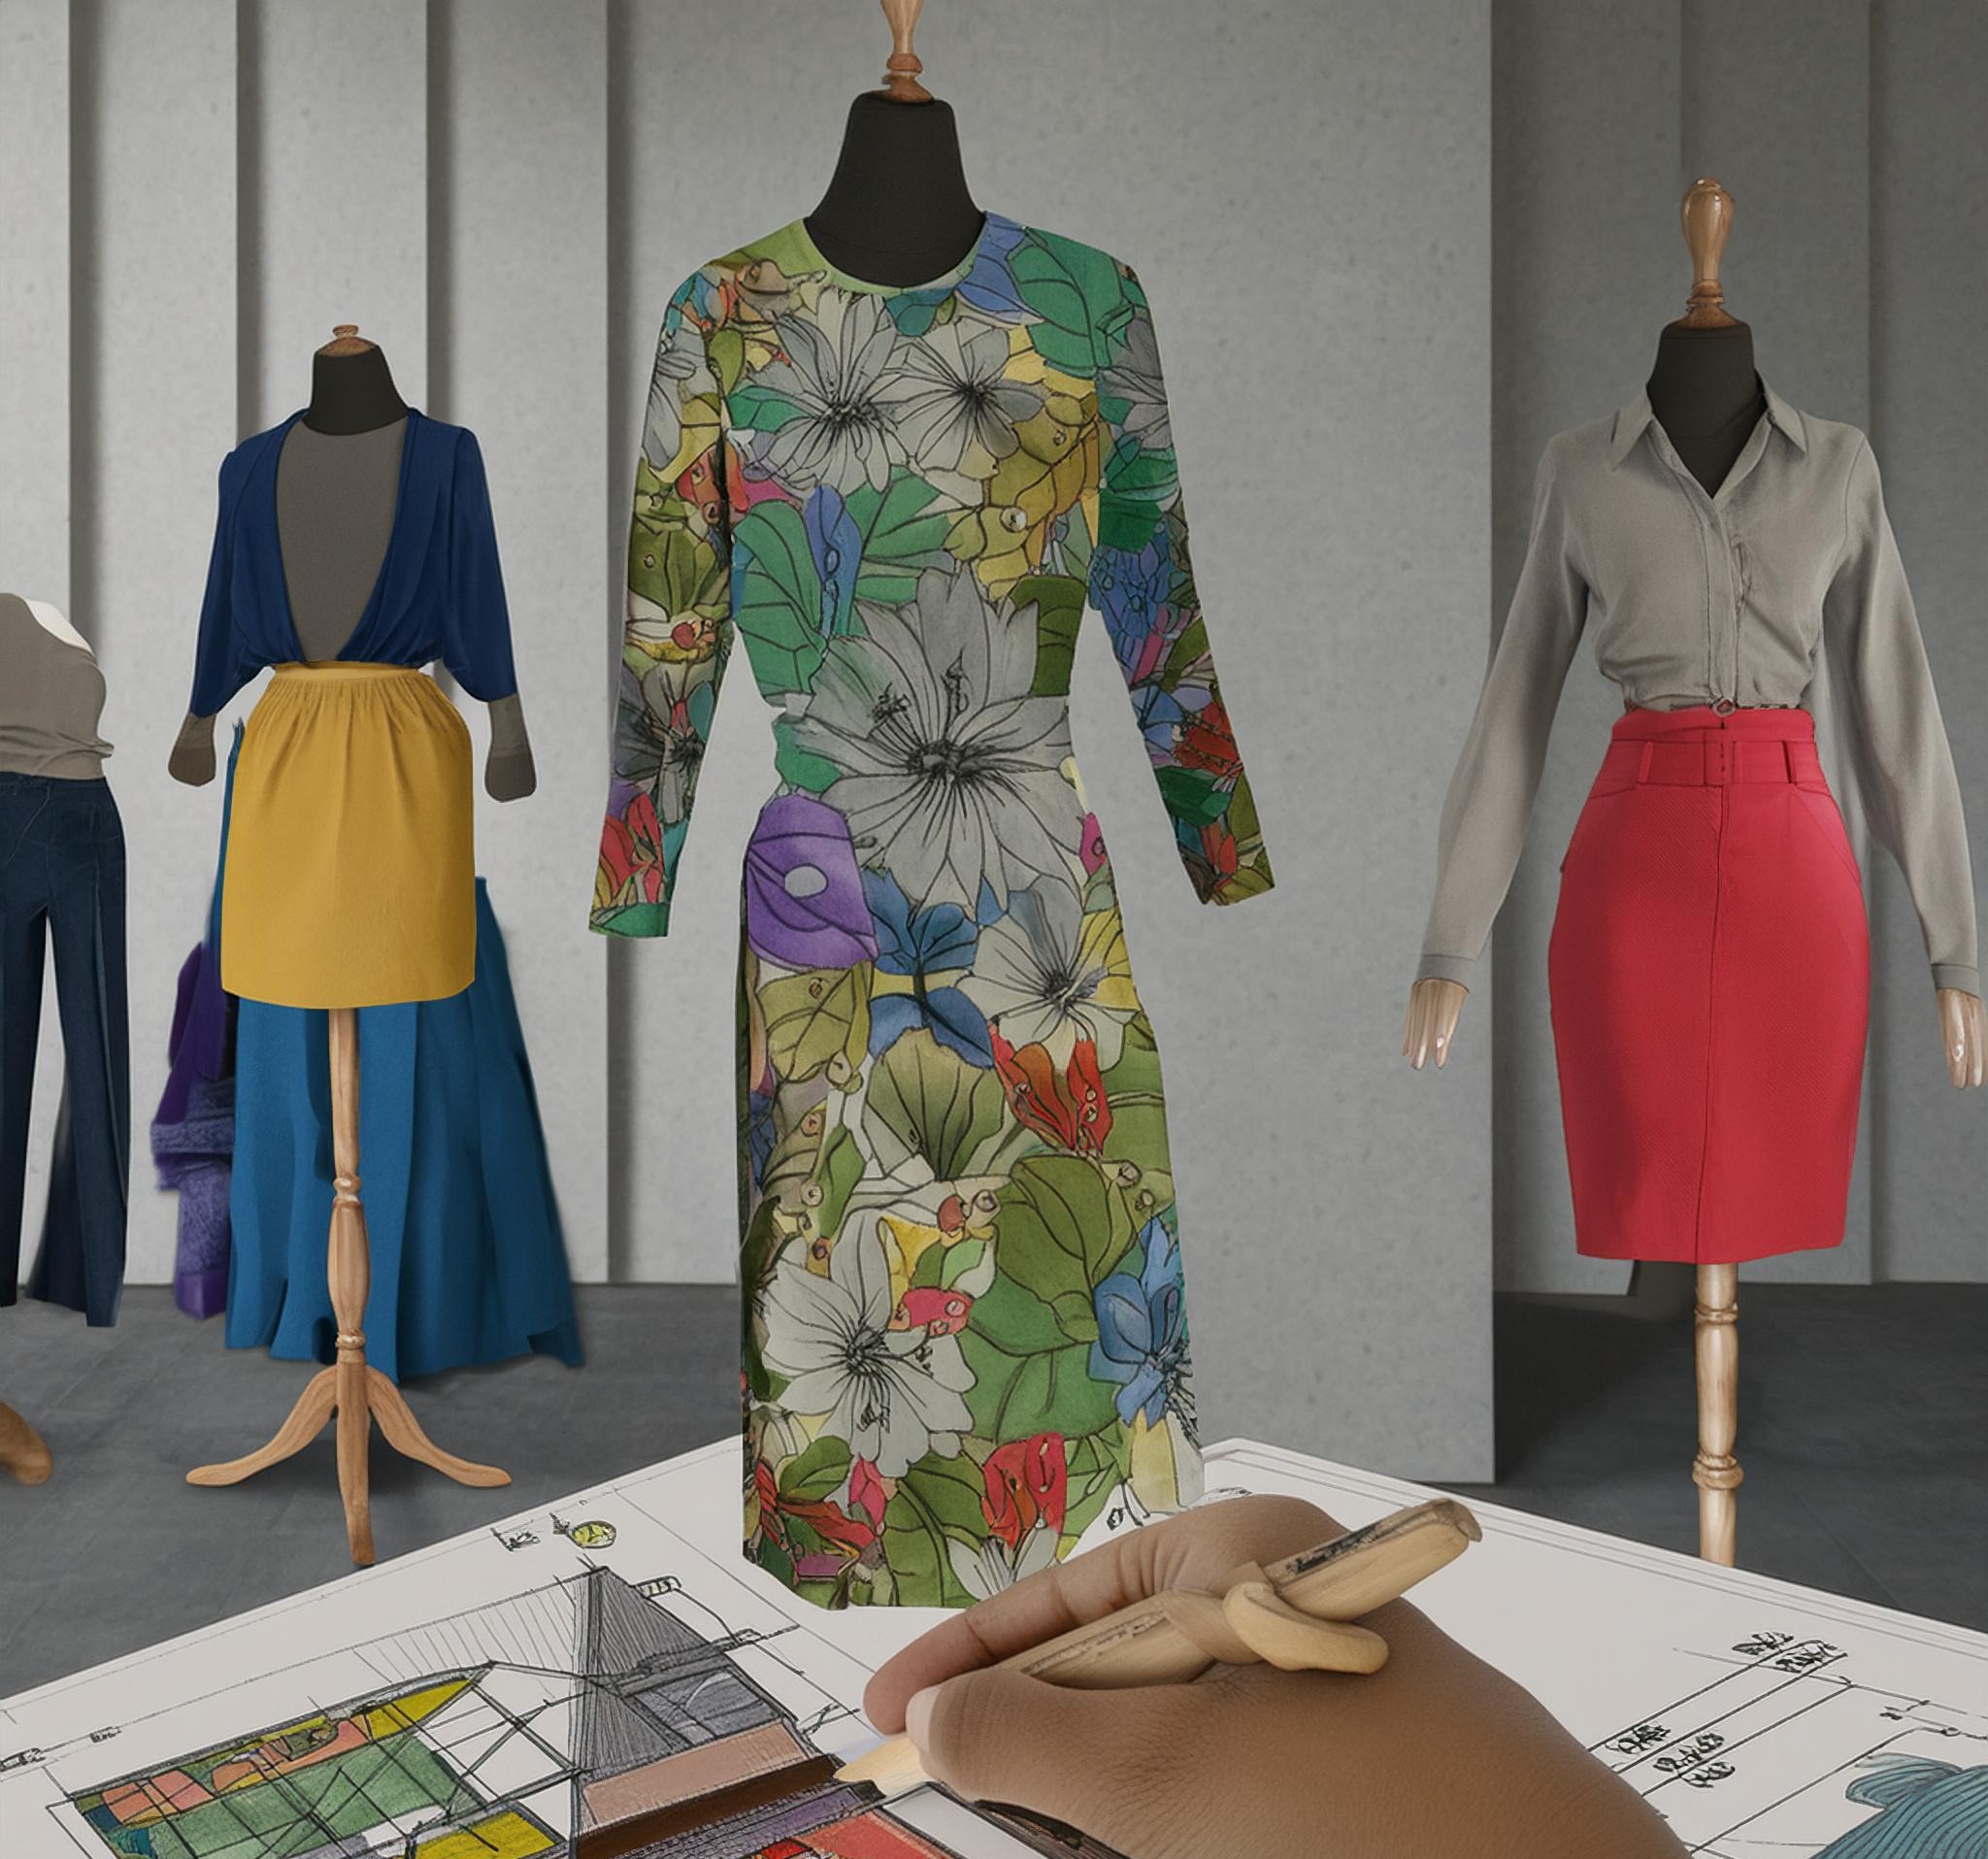 [A design studio with mannequins dressed in various outfits and a hand sketching colorful patterns on a sheet, likely for fashion design or architectural planning]-[fabricpitara]